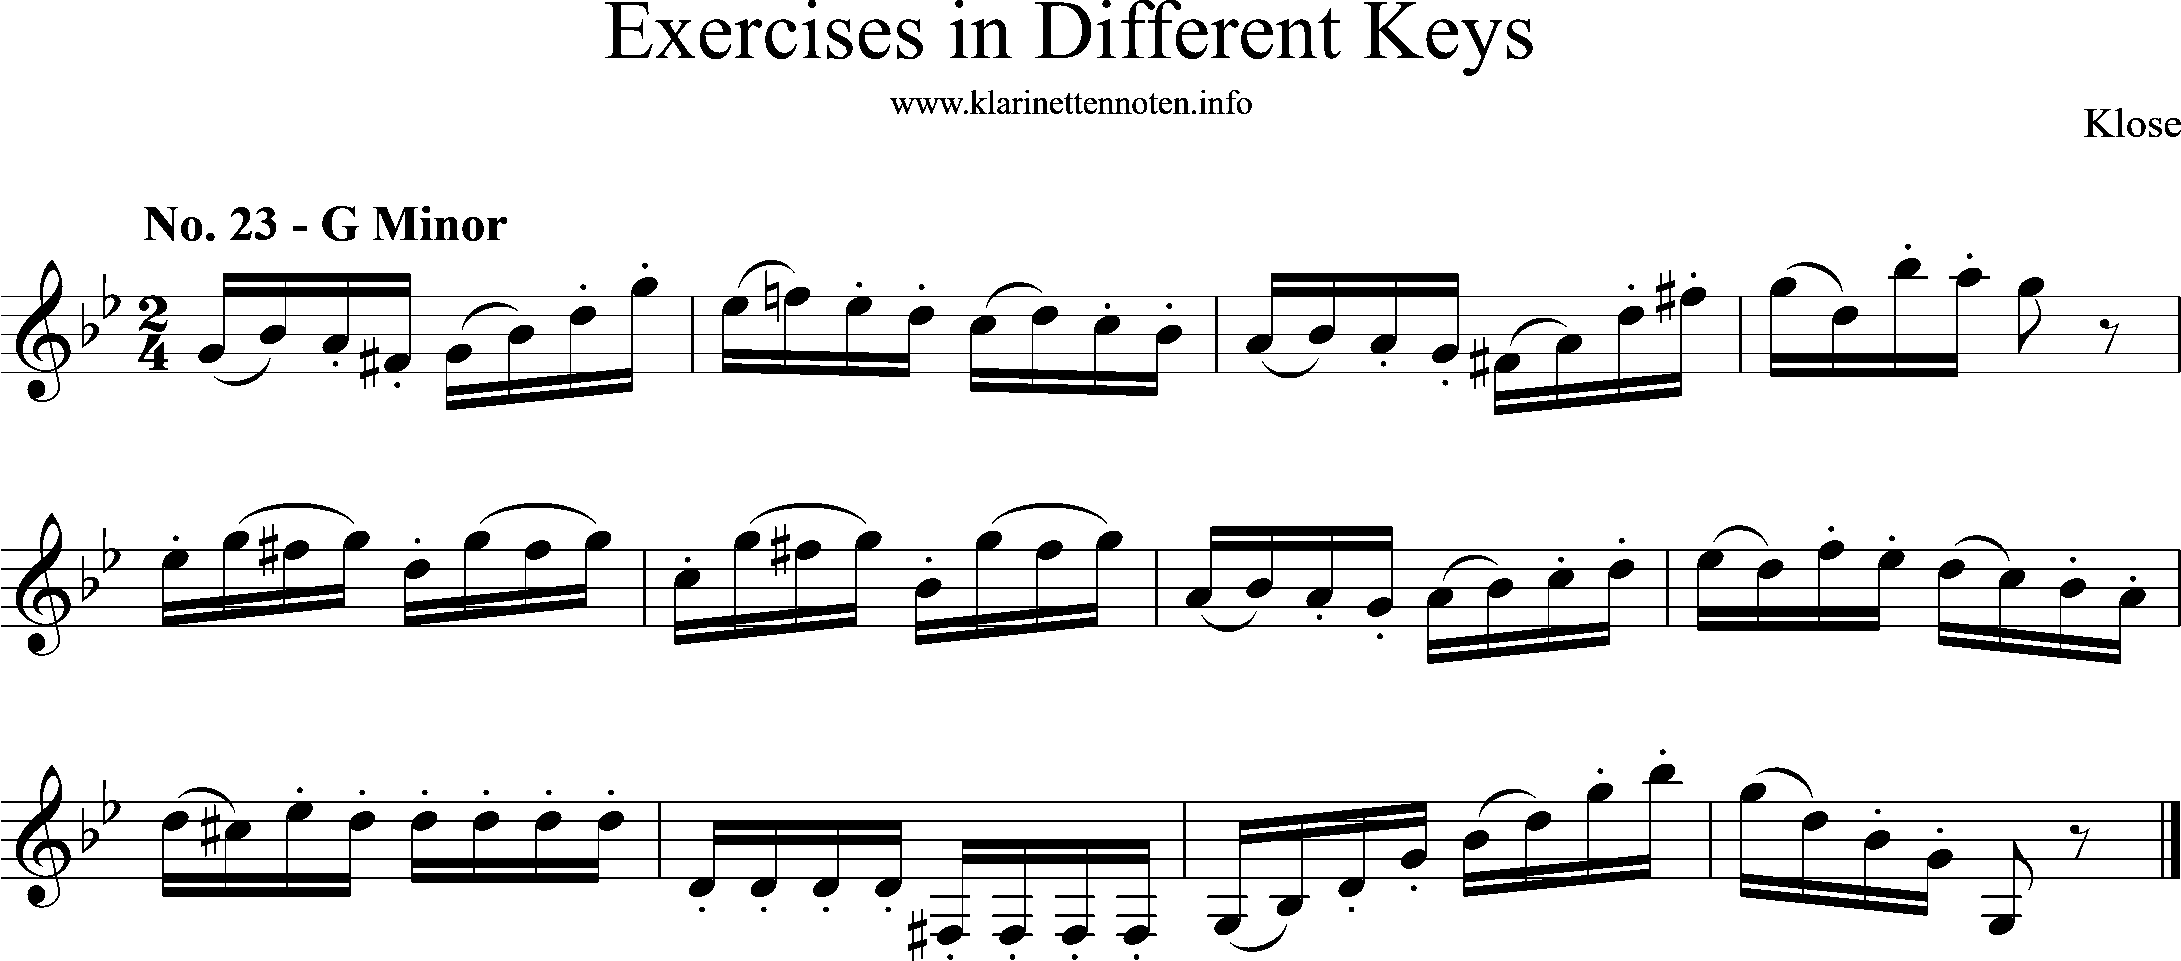 Exercises in Differewnt Keys, klose, No-23, G-Minor